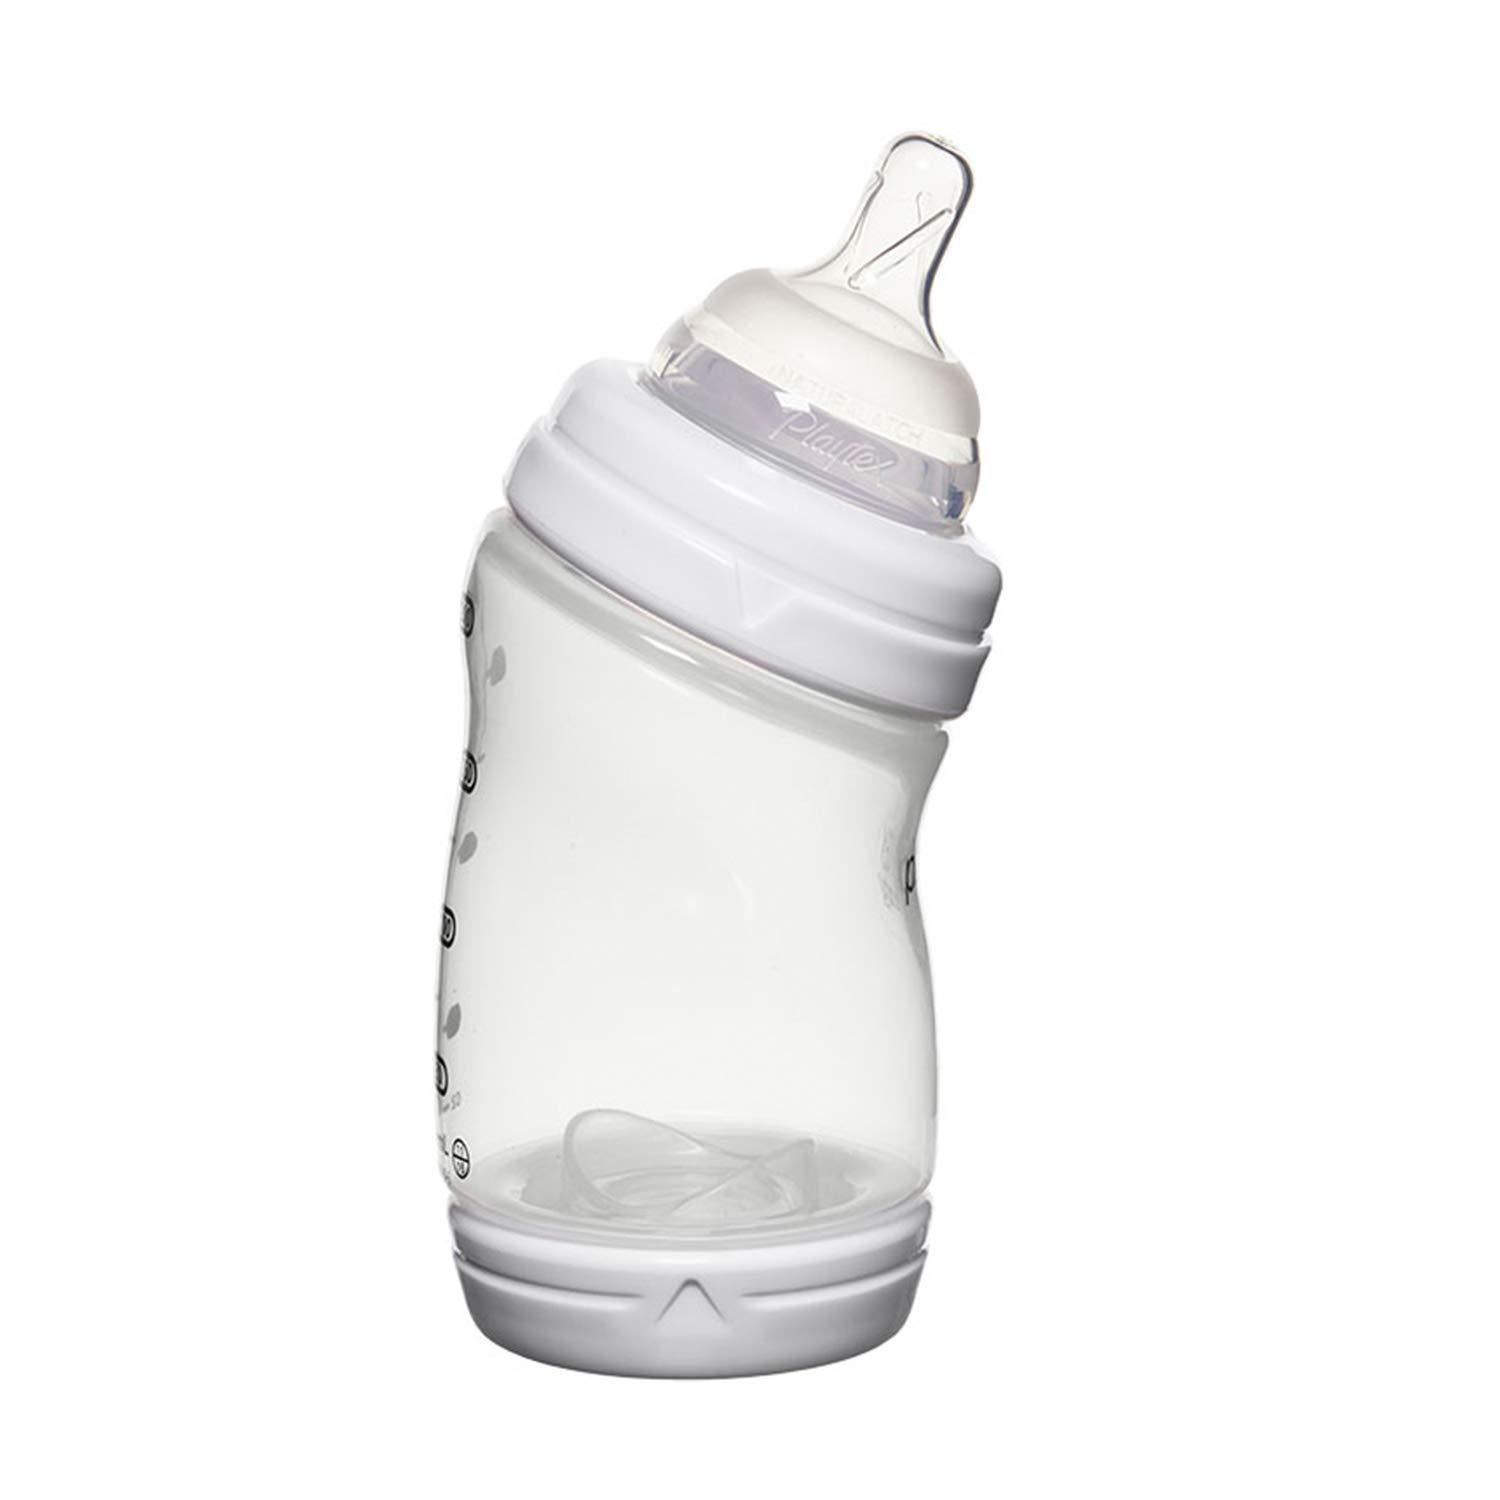  Playtex Baby VentAire Bottle, Helps Prevent Colic and